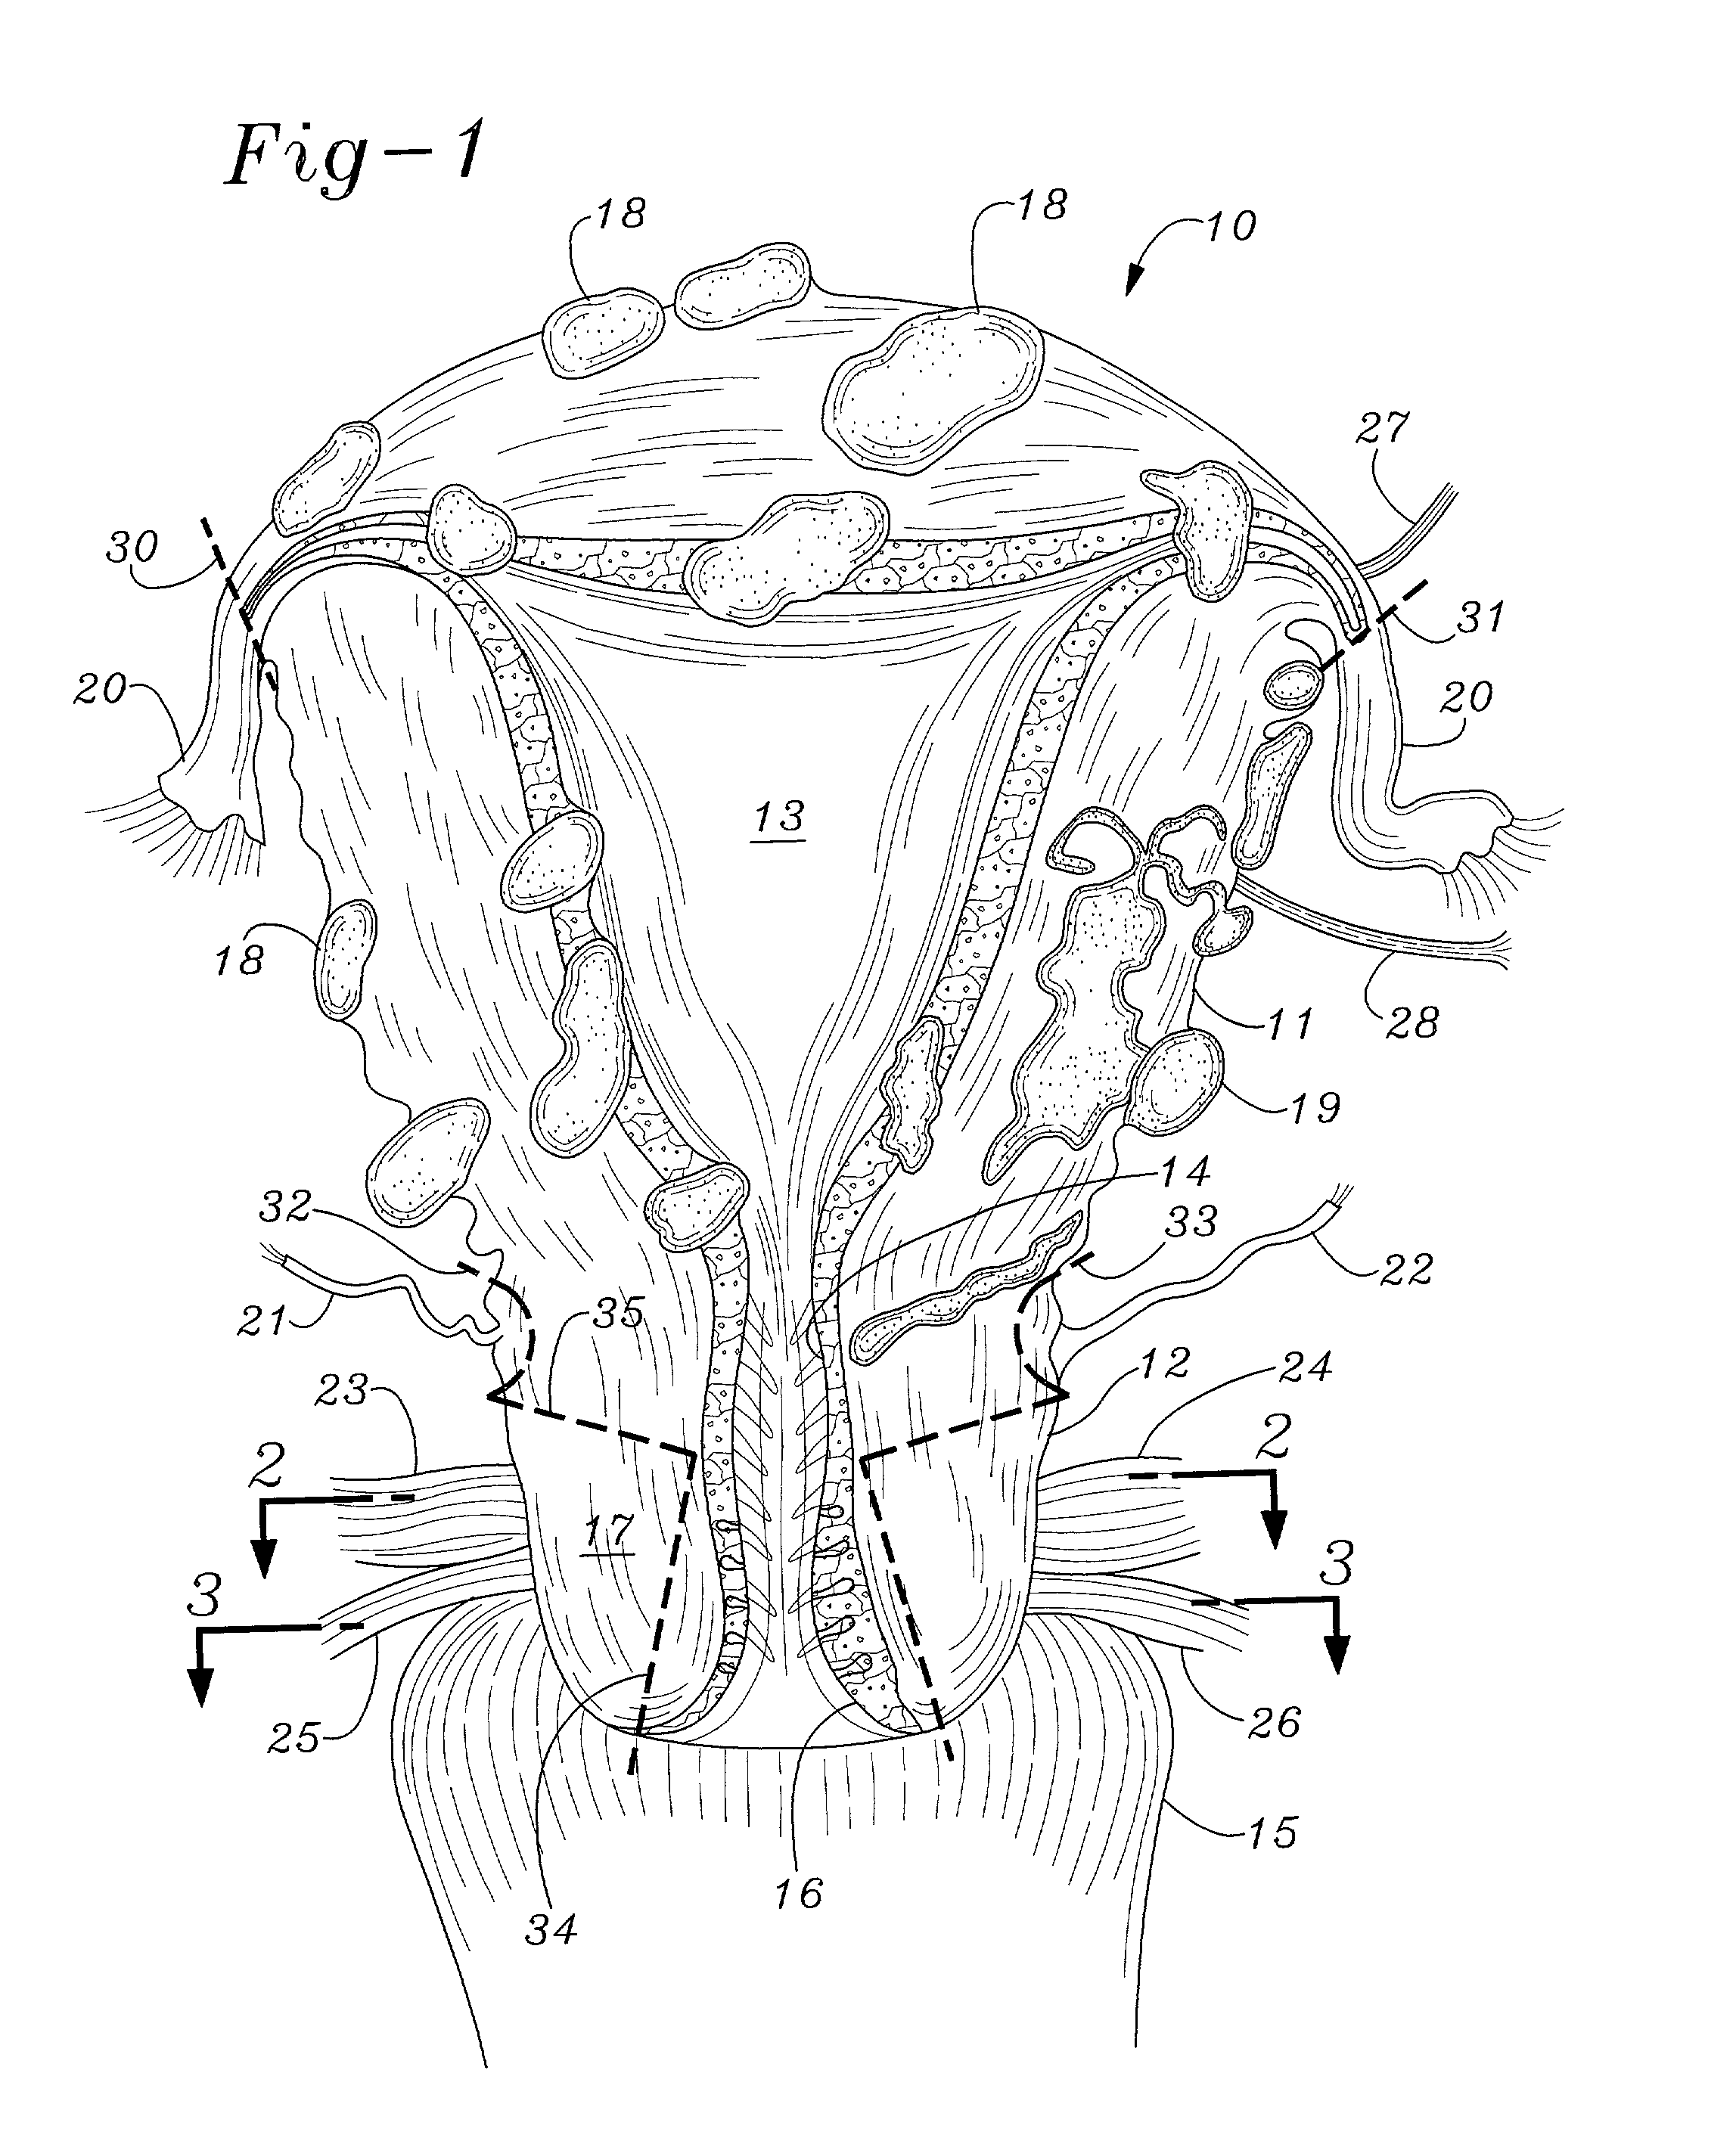 Method for performing a hysterectomy